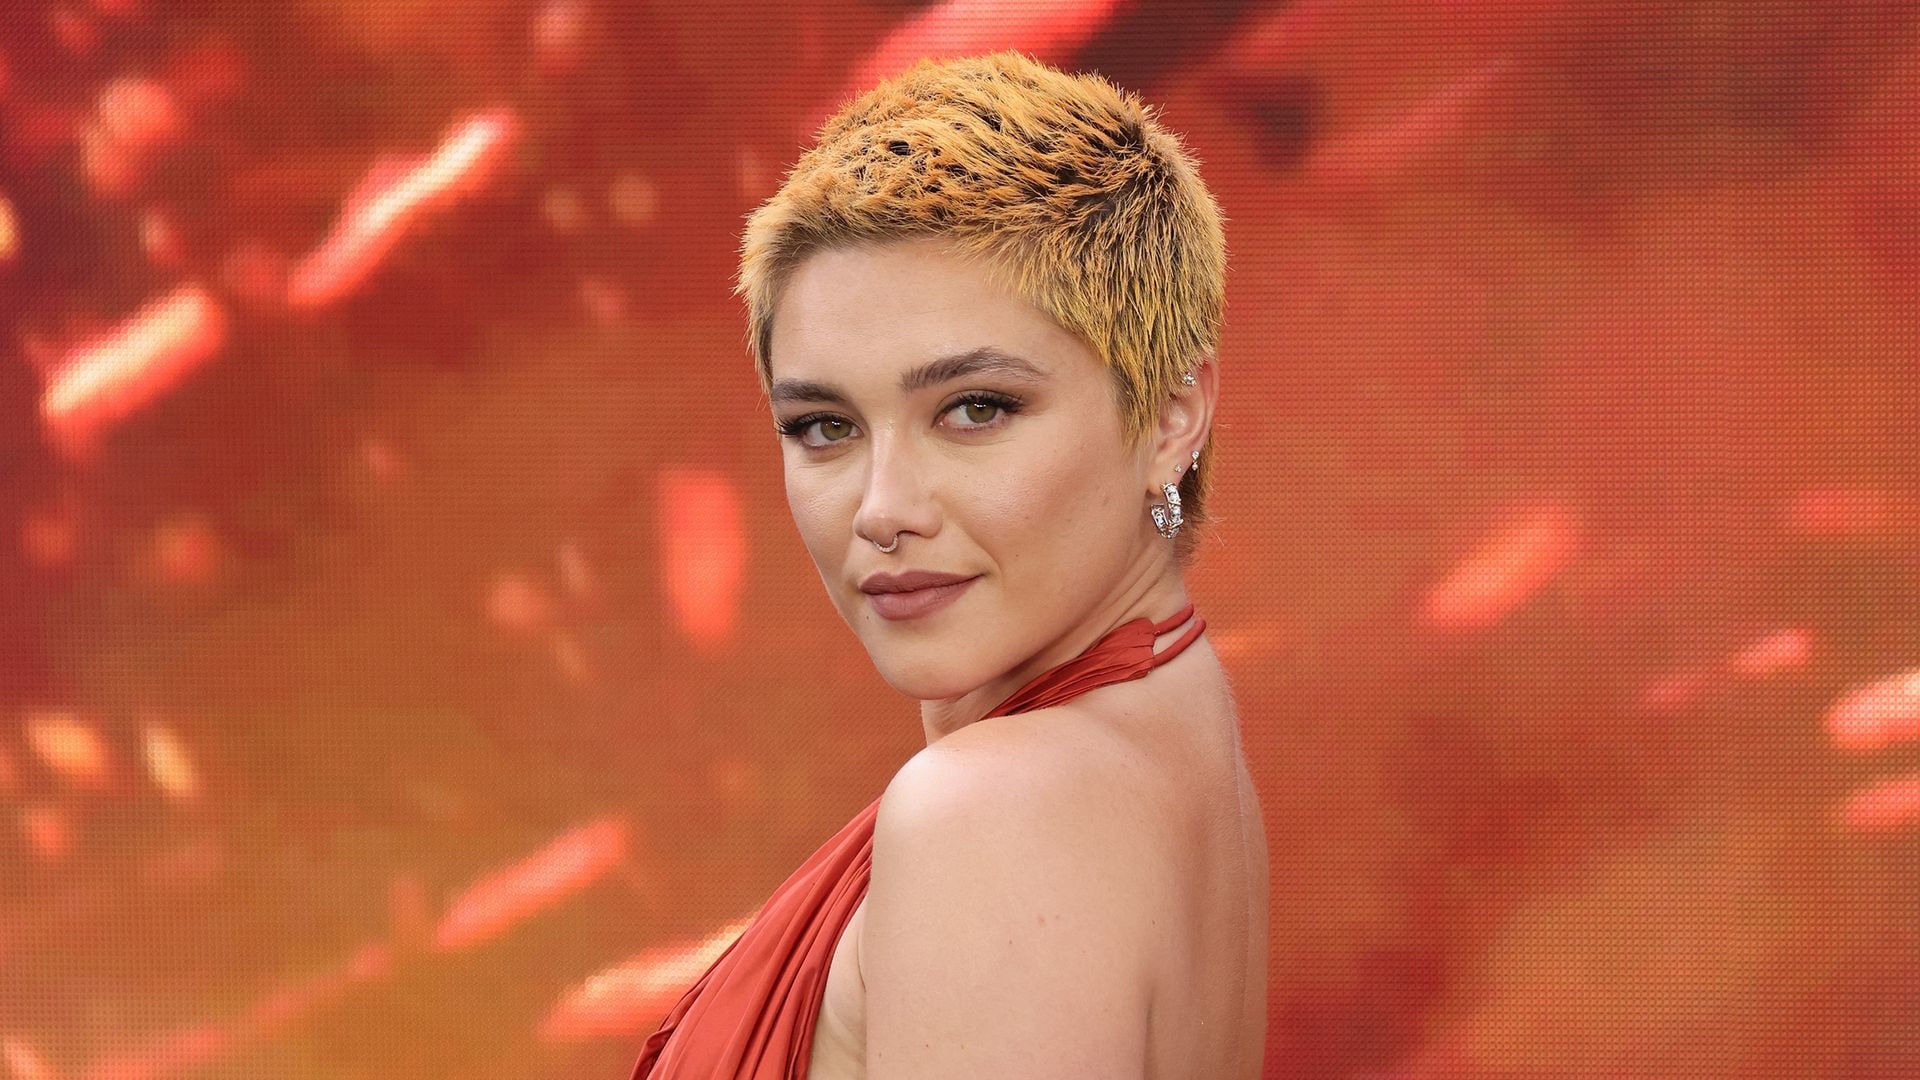 Florence Pugh's Style: Florence Pugh's Best Red Carpet Moments